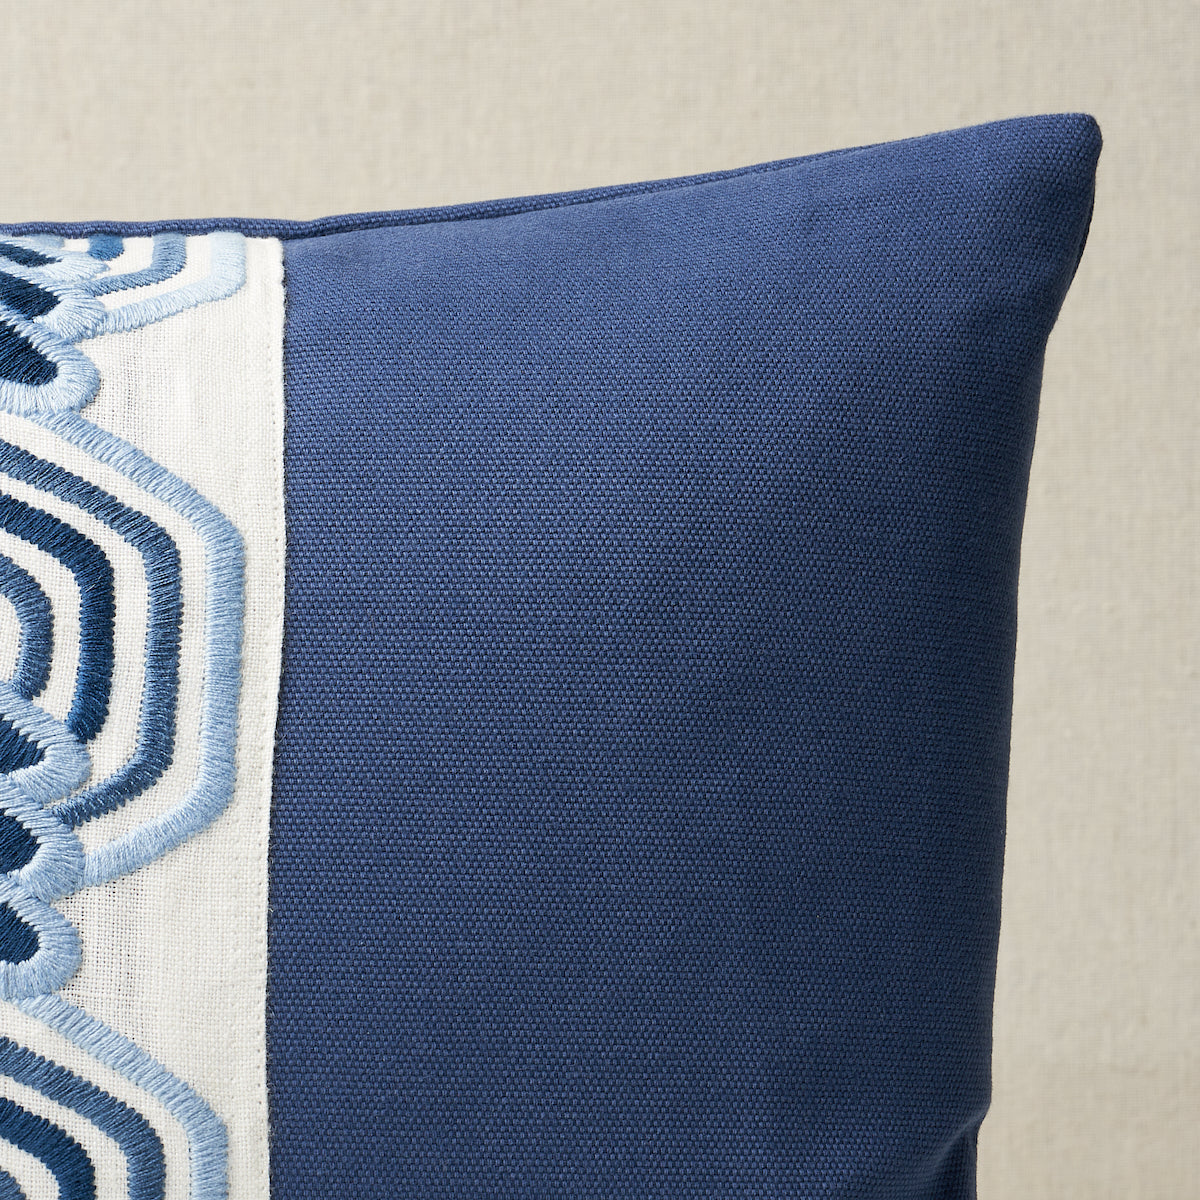 Purchase So8363011 | The Twist Embroidered Pillow, Marine - Schumacher Pillows